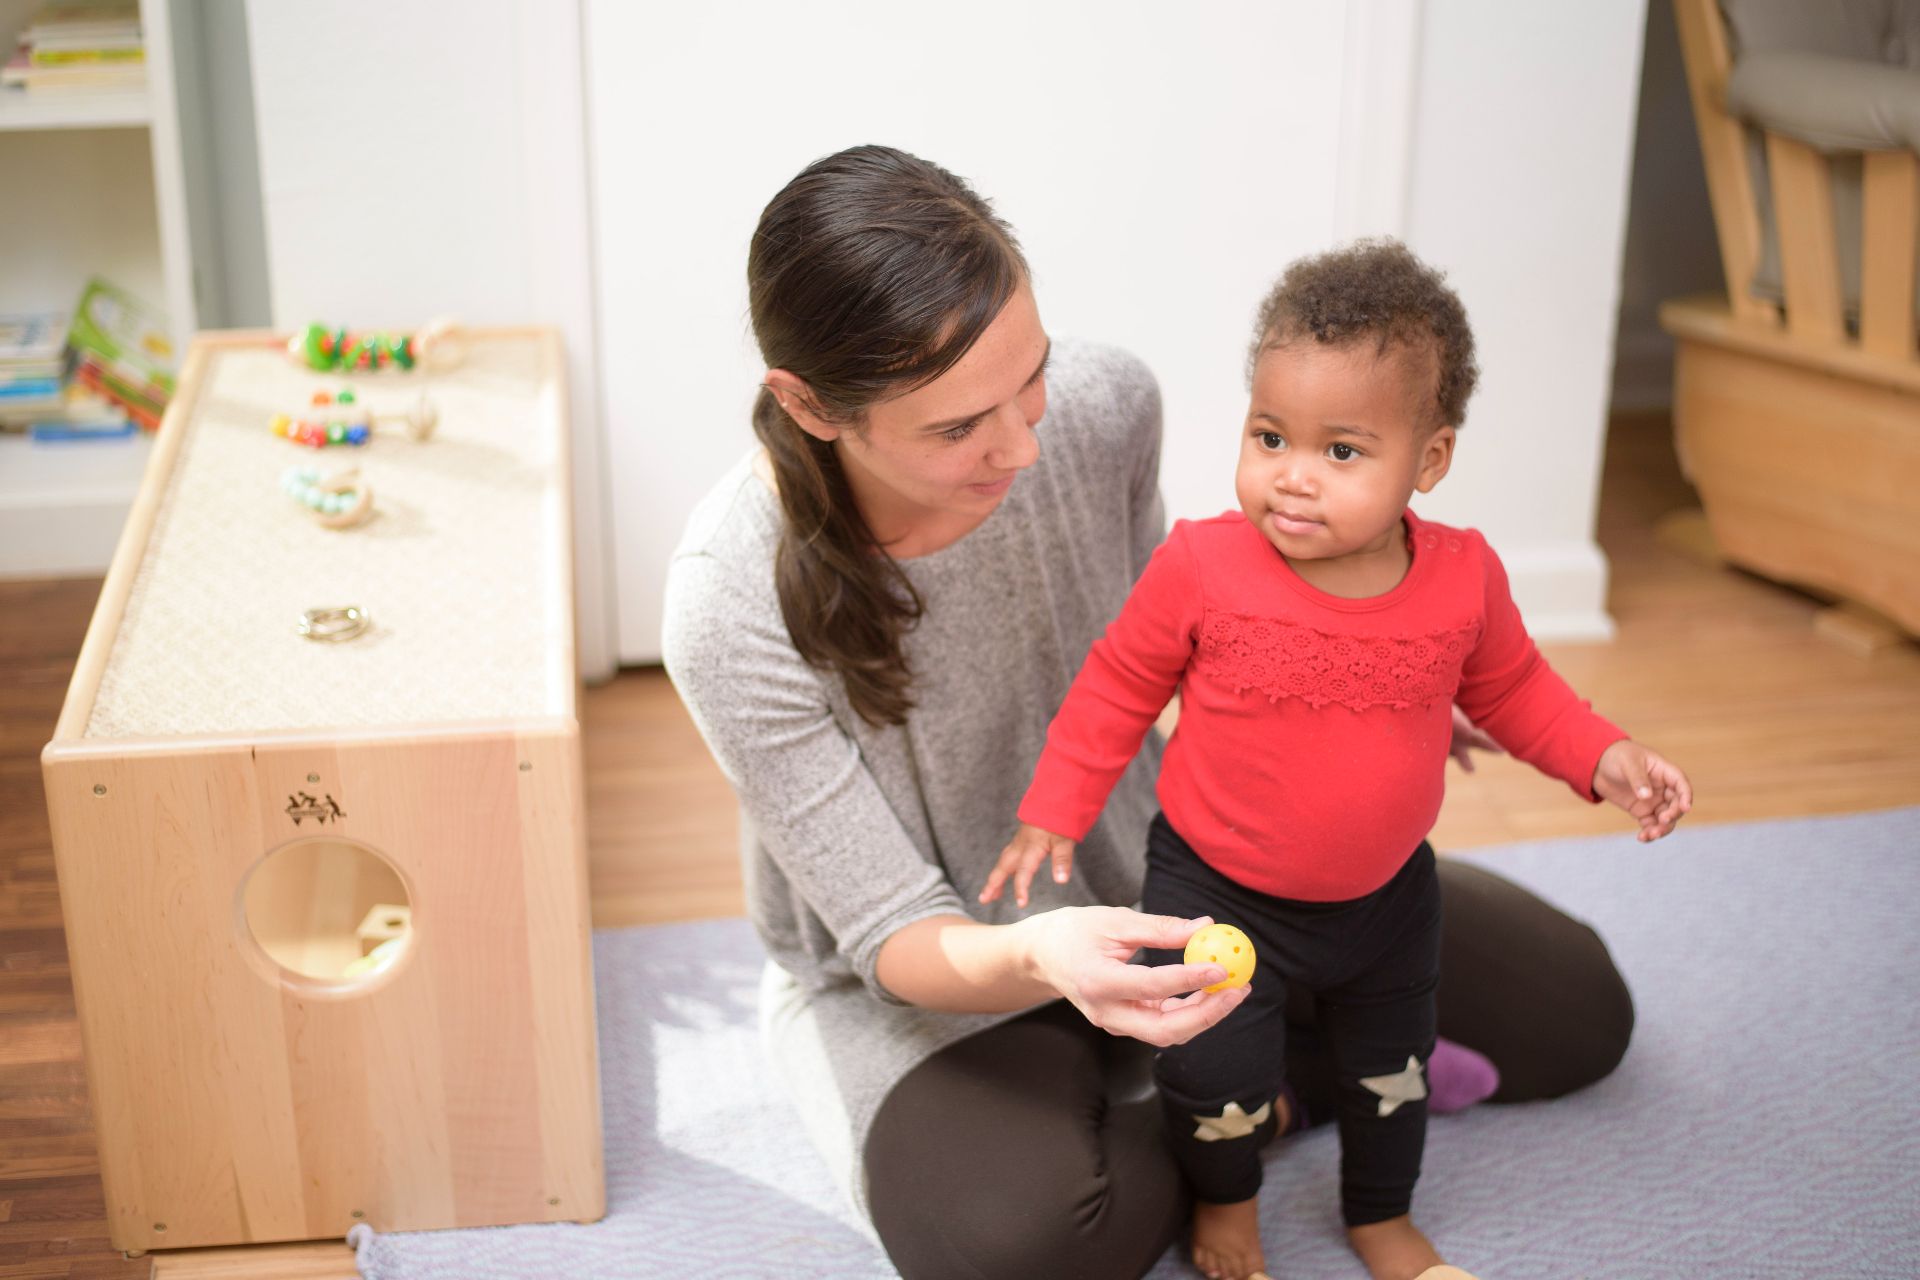 Babies to Toddlers: Communication for Connection